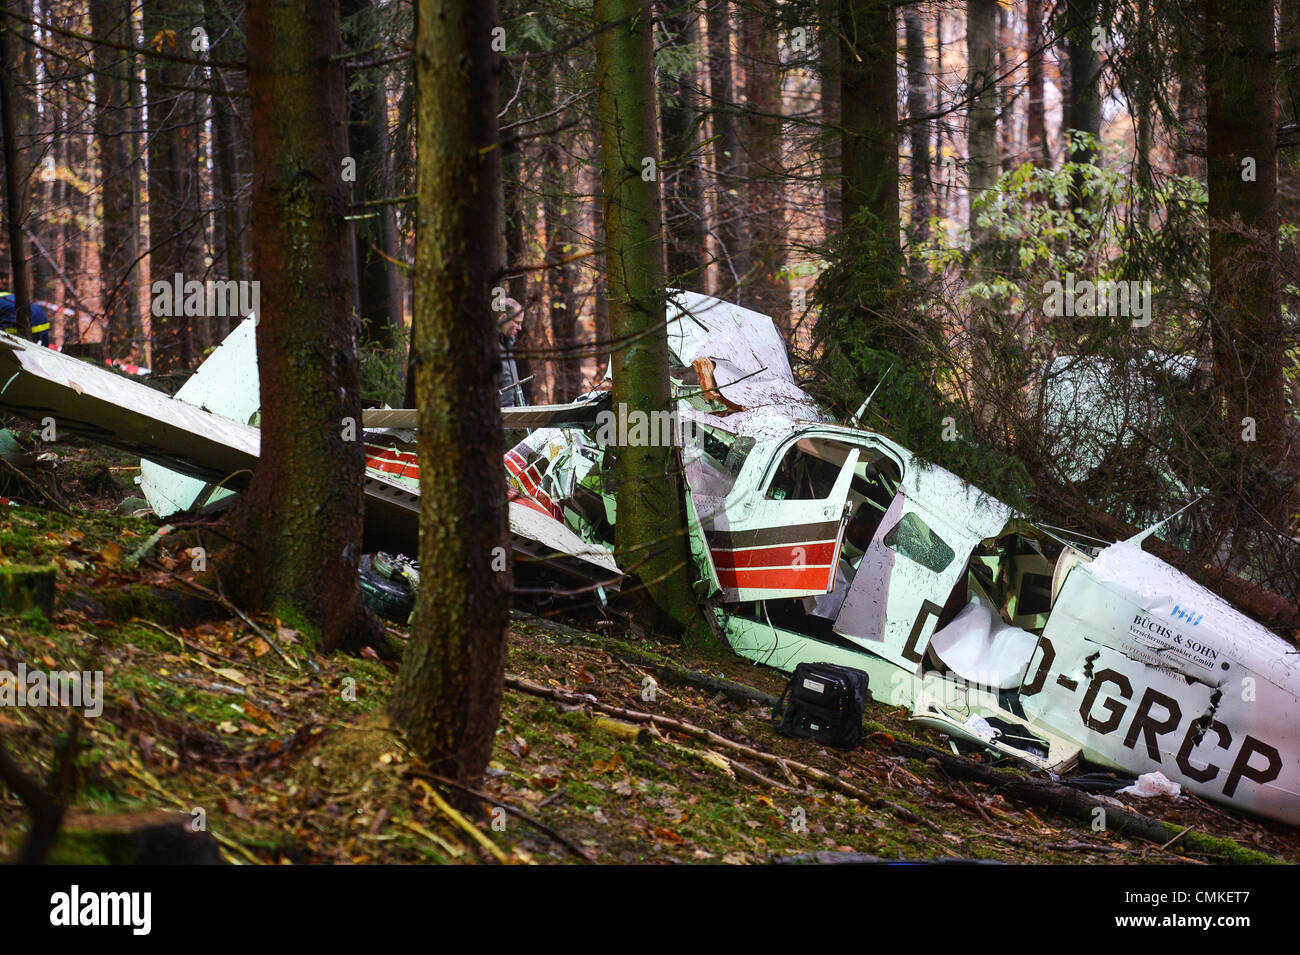 Cortendorf, Germany. 02nd Nov, 2013. The fuselage of a twin-engined aircraft after crashing into a forest in Cortendorf, Germany, 02 November 2013. Three people died in the crash. Photo: DAVID EBENER/dpa/Alamy Live News Stock Photo